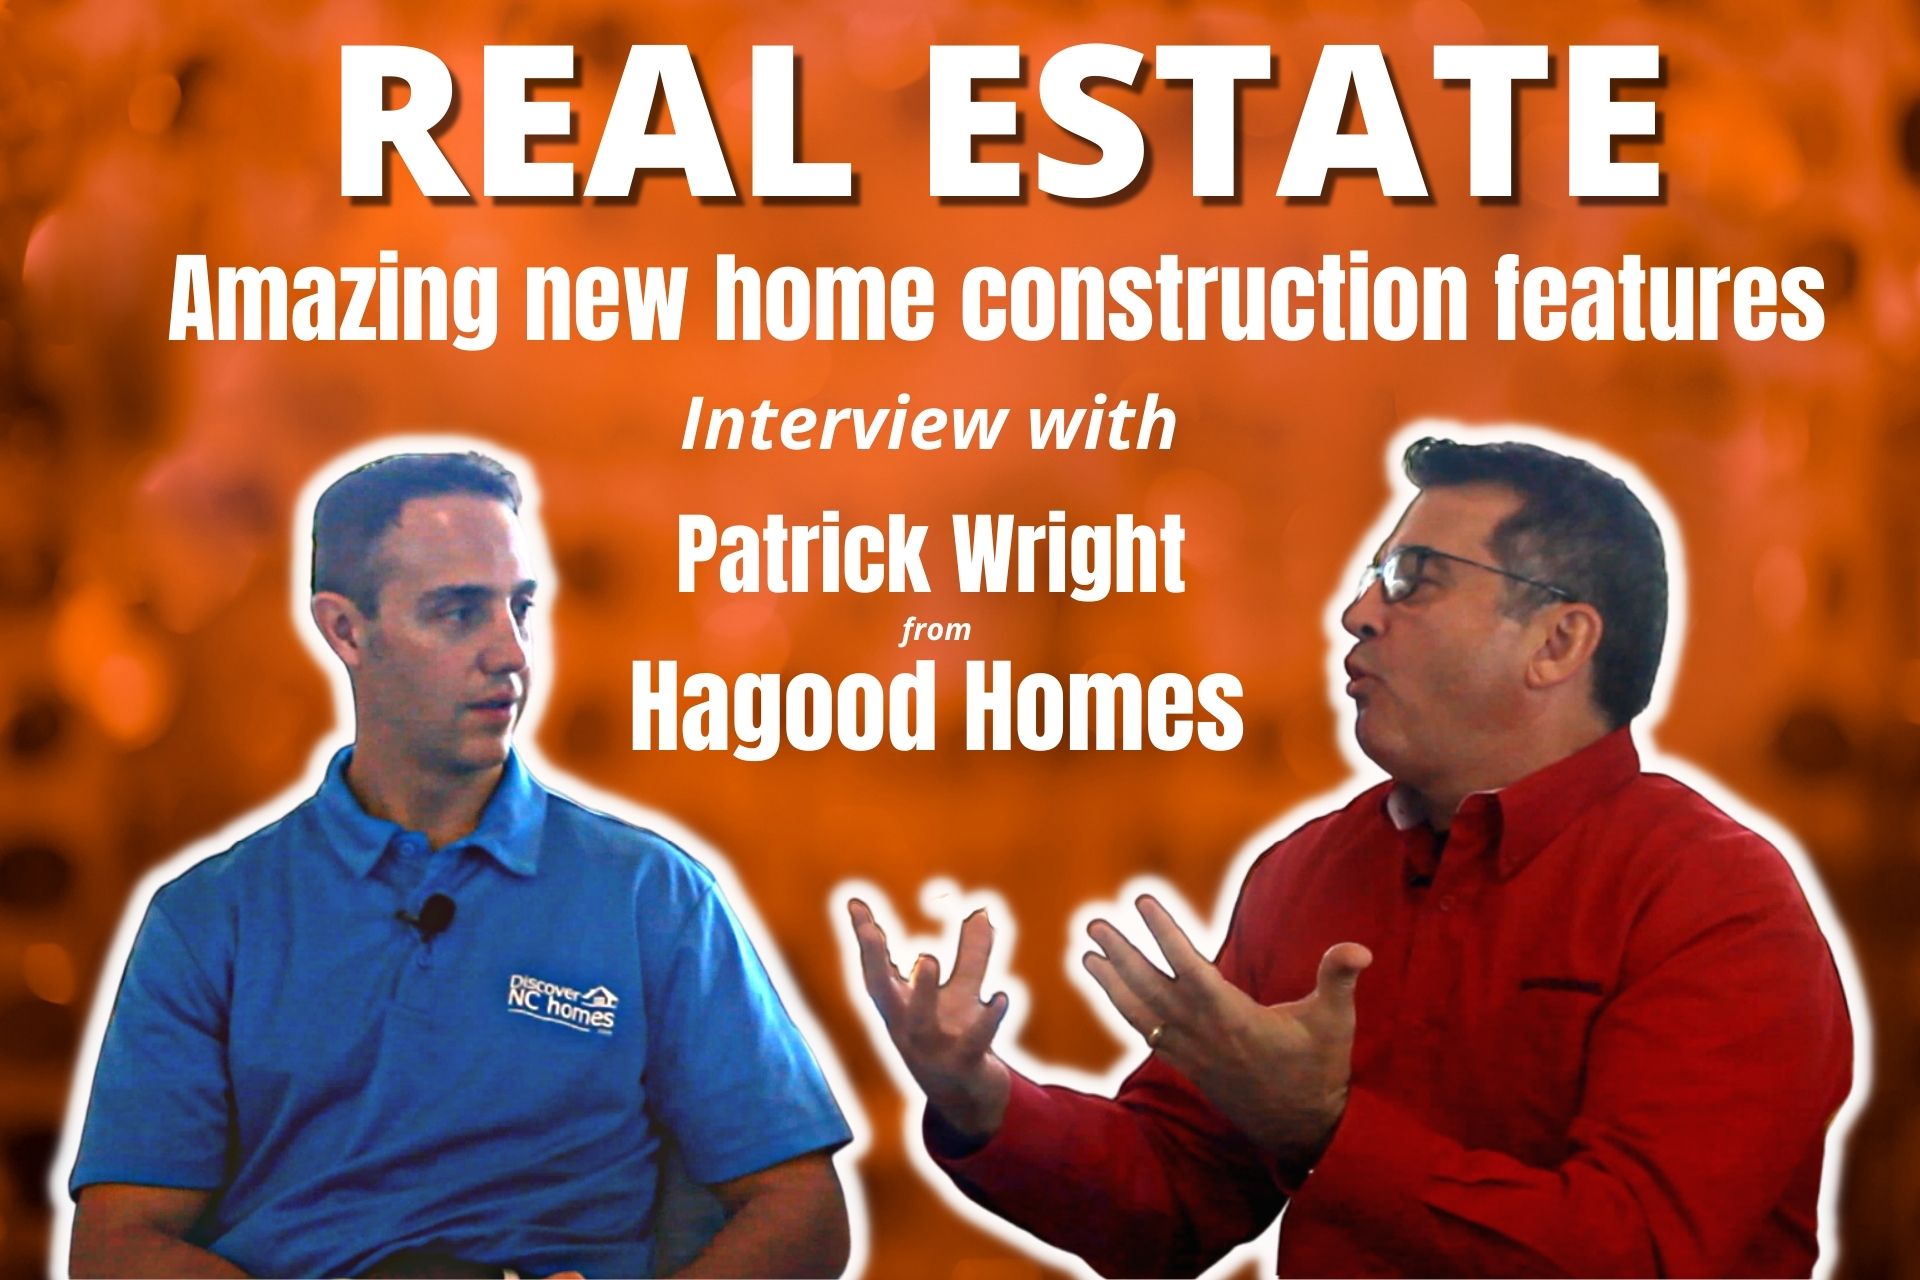 Interview with Patrick Wright - Hagood Homes